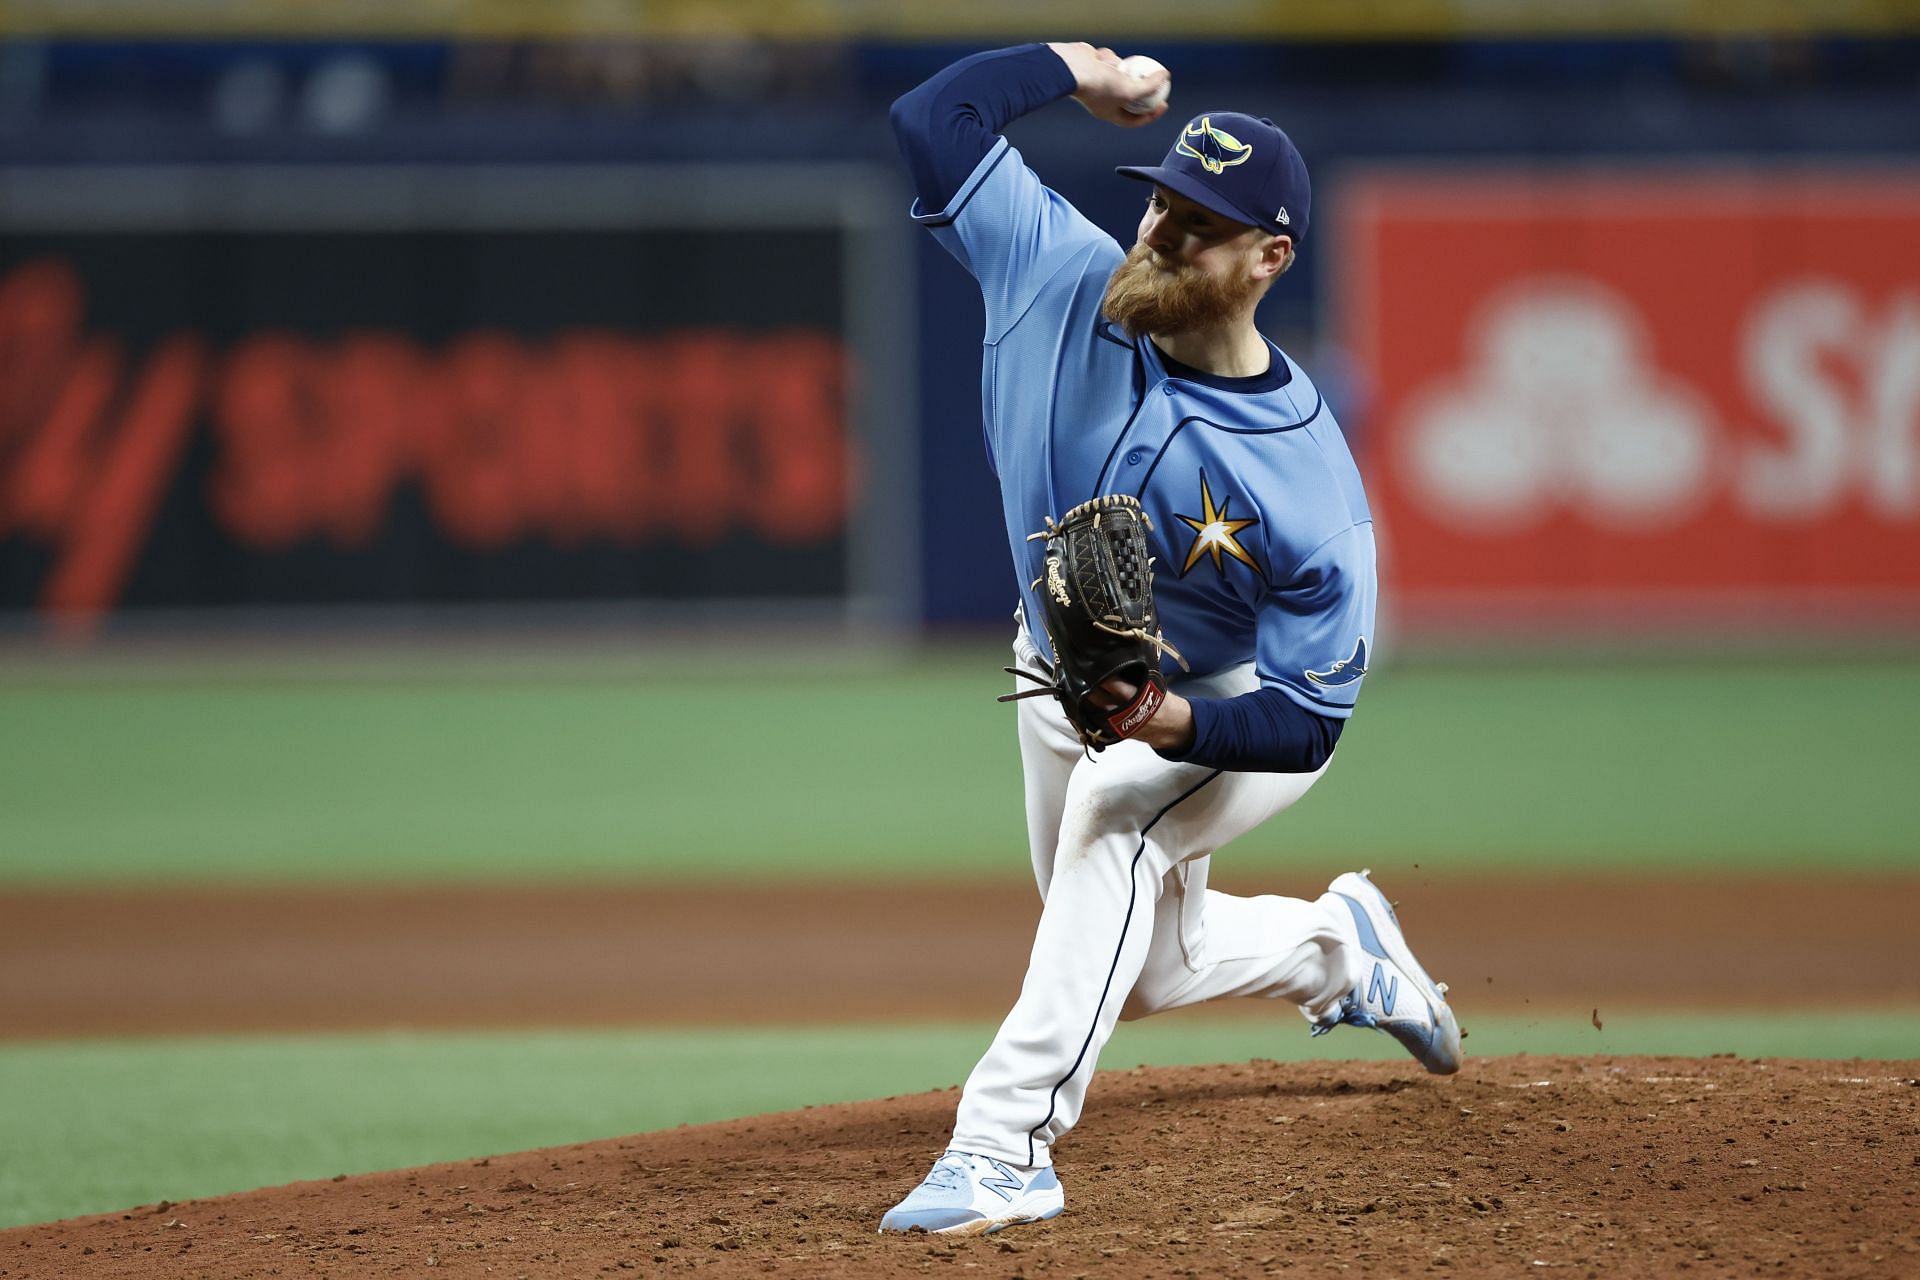 Drew Rasmussen throws a pitch during the eighth inning against the Baltimore Orioles at Tropicana Field.